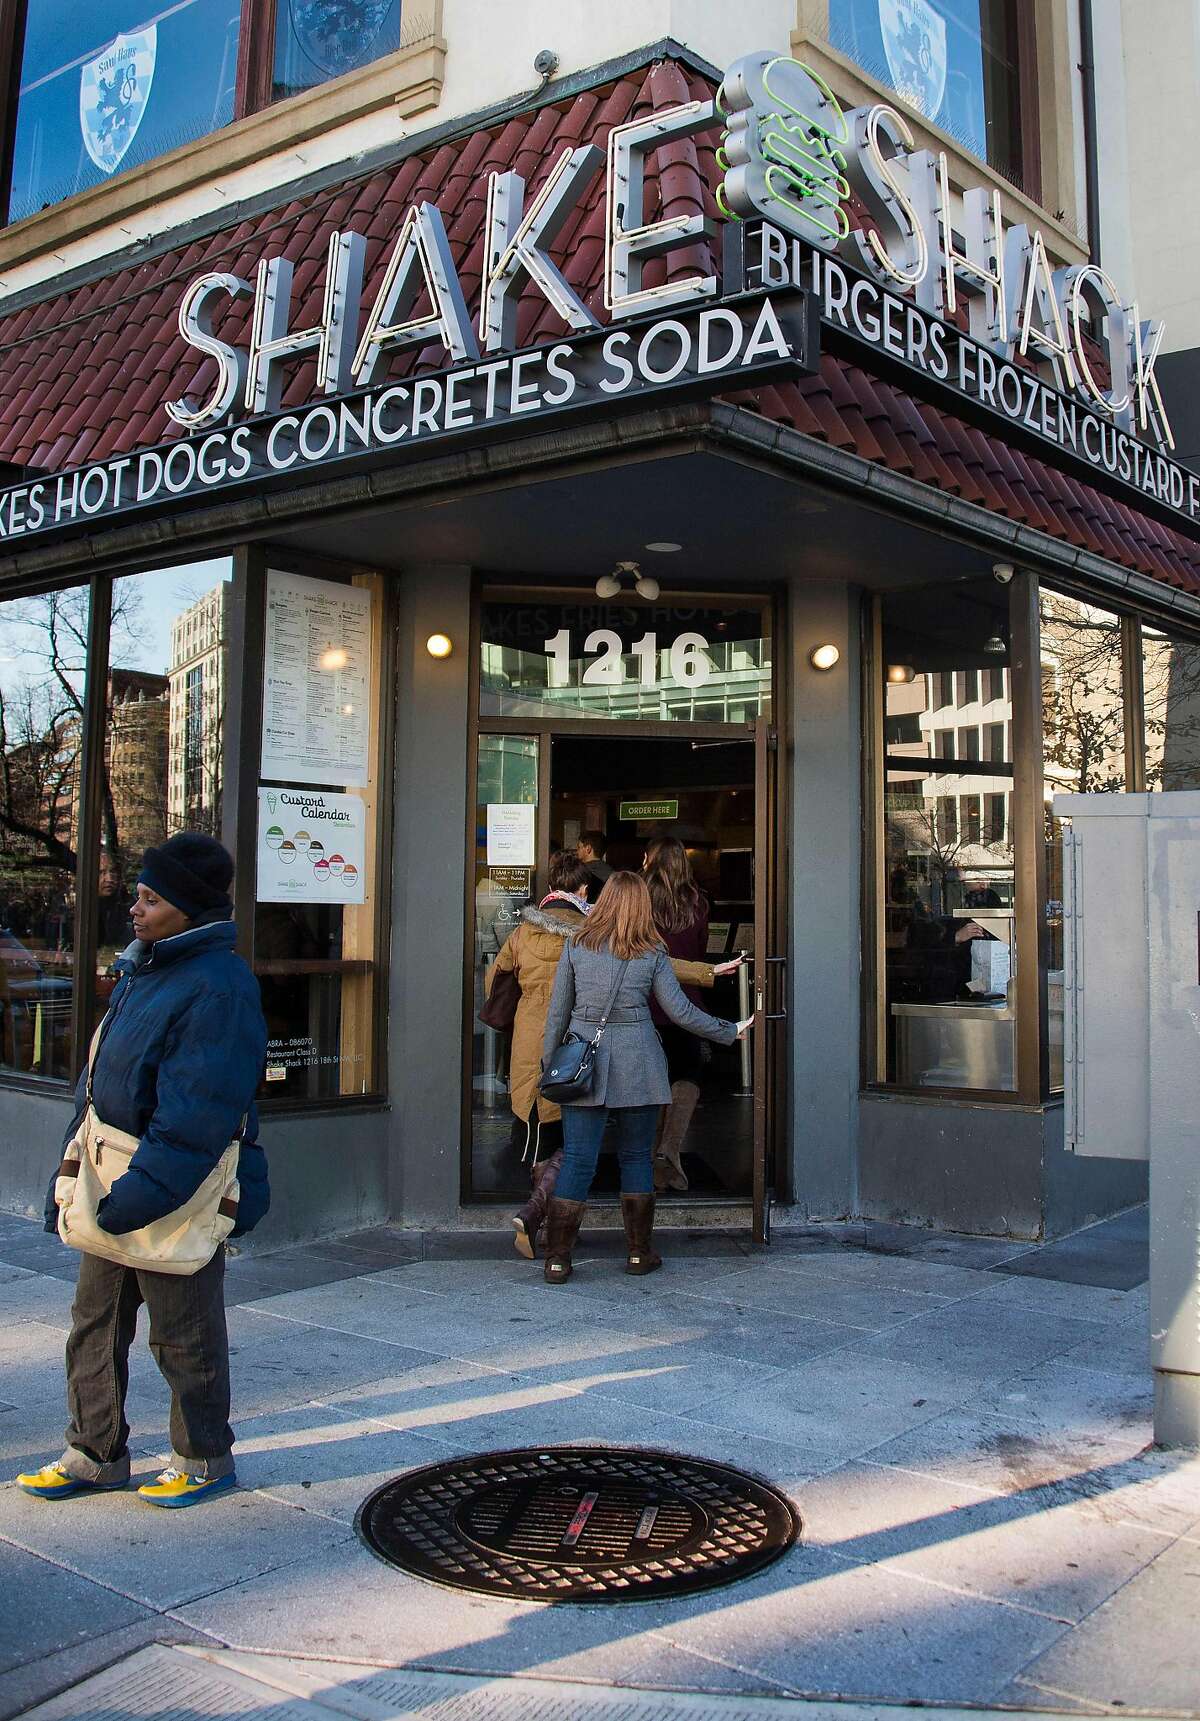 Institutions that have received, and returned, government bailout money Shake Shack Upscale burger chain Shake Shack said it had returned $10 million received from a US small business loan program, raising fresh questions about how the emergency financing is being managed as Congress negotiates over adding funding.